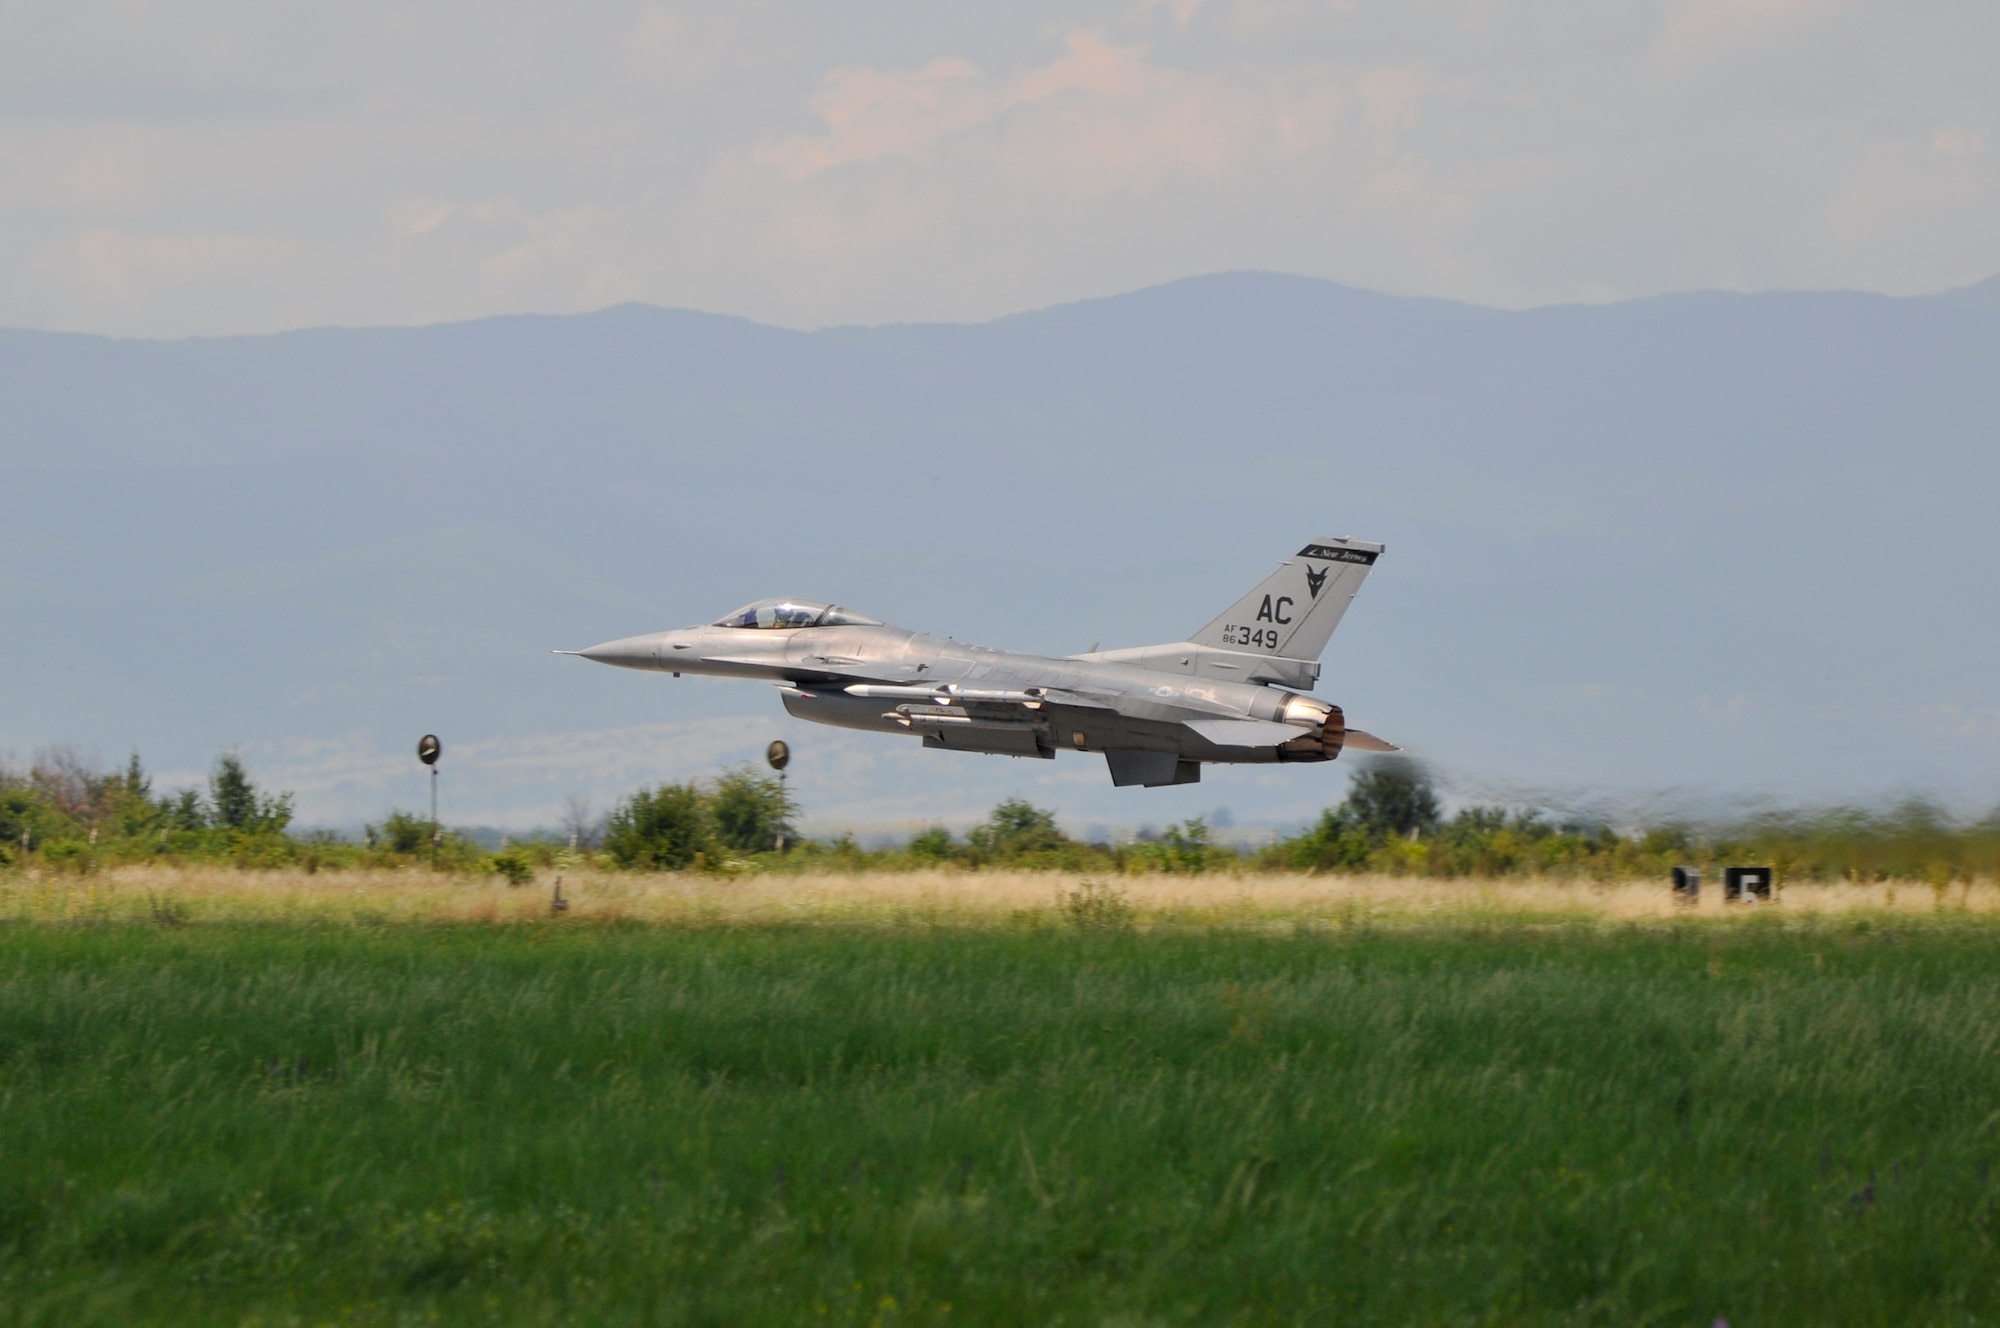 A picture of a U.S. Air Force F-16C Fighting Falcon taking off from a runway.